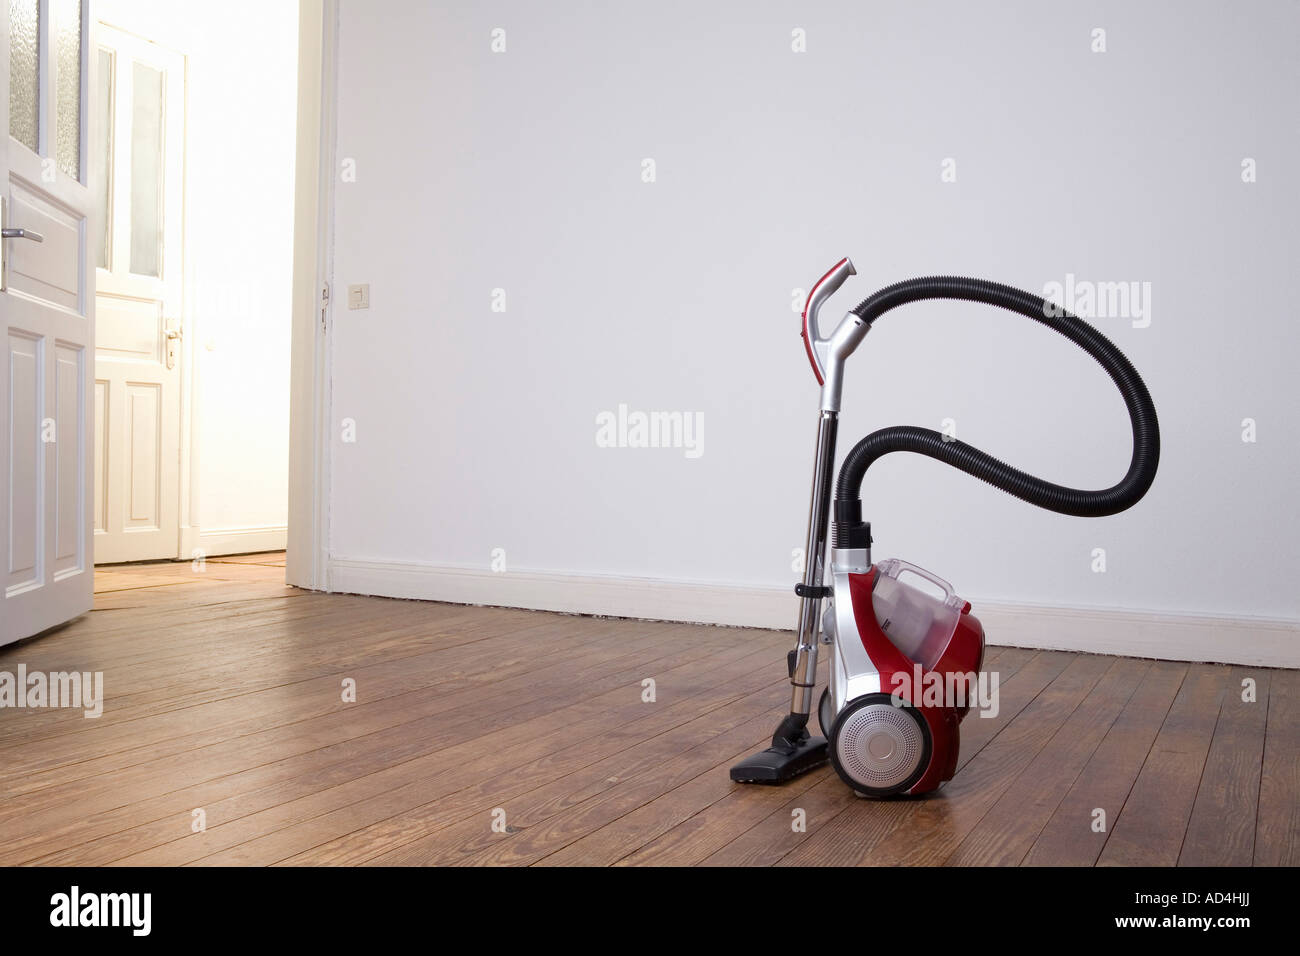 Vacuum cleaner in an empty room Stock Photo